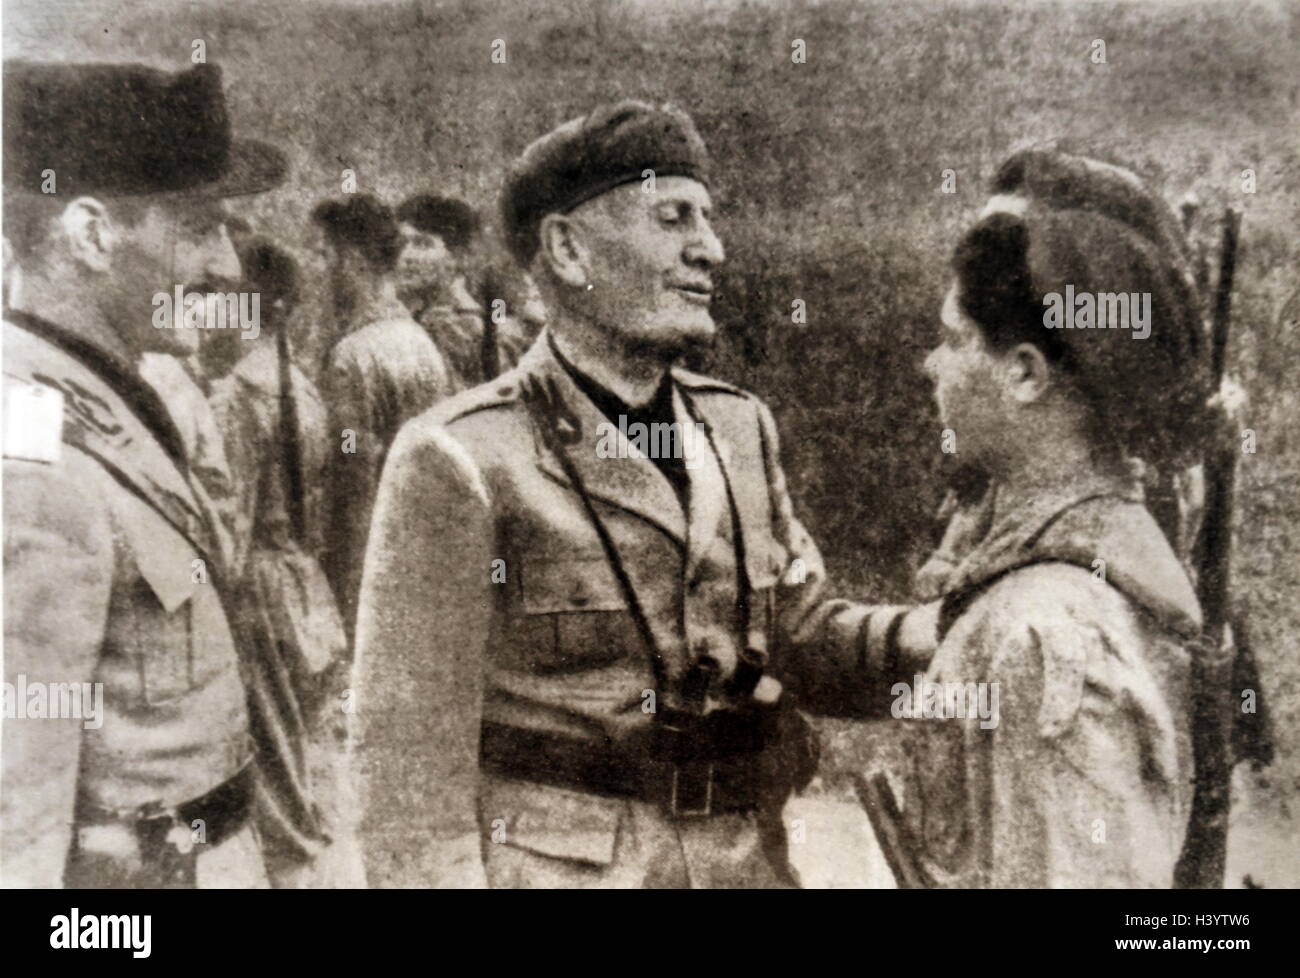 Photograph of Benito Mussolini (1883-1945) an Italian politician, journalist, and leader of the National Fascist Party. Dated 20th Century Stock Photo